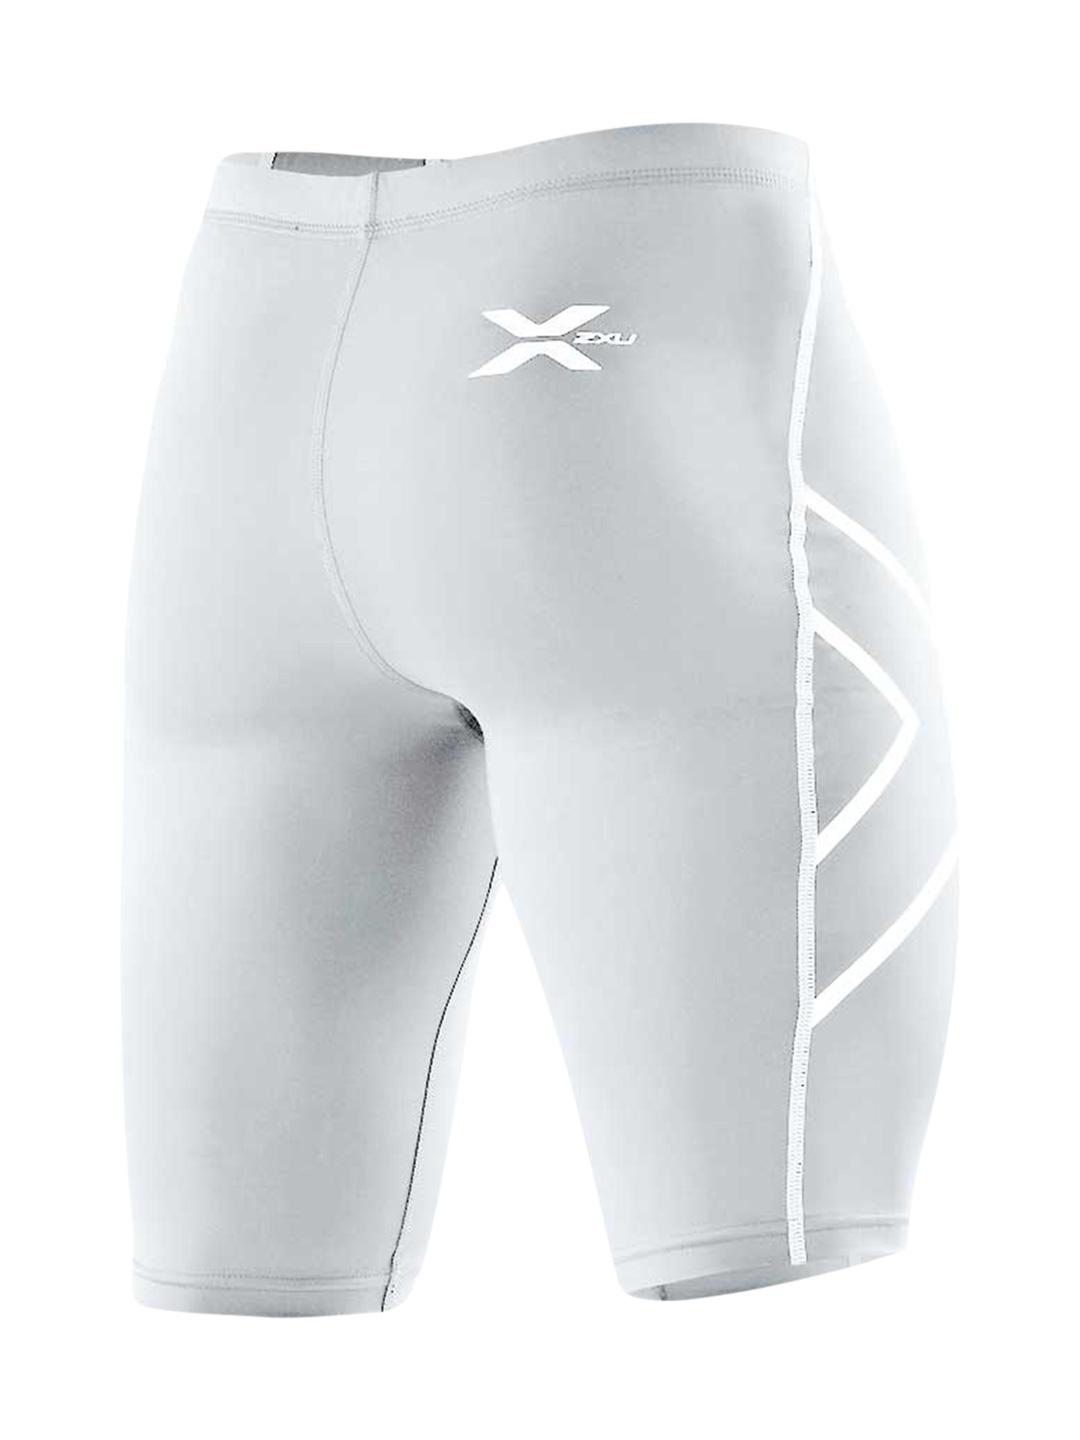 Trin melodramatiske Takke 2XU Synthetic Compression Shorts in White/White (White) for Men - Lyst